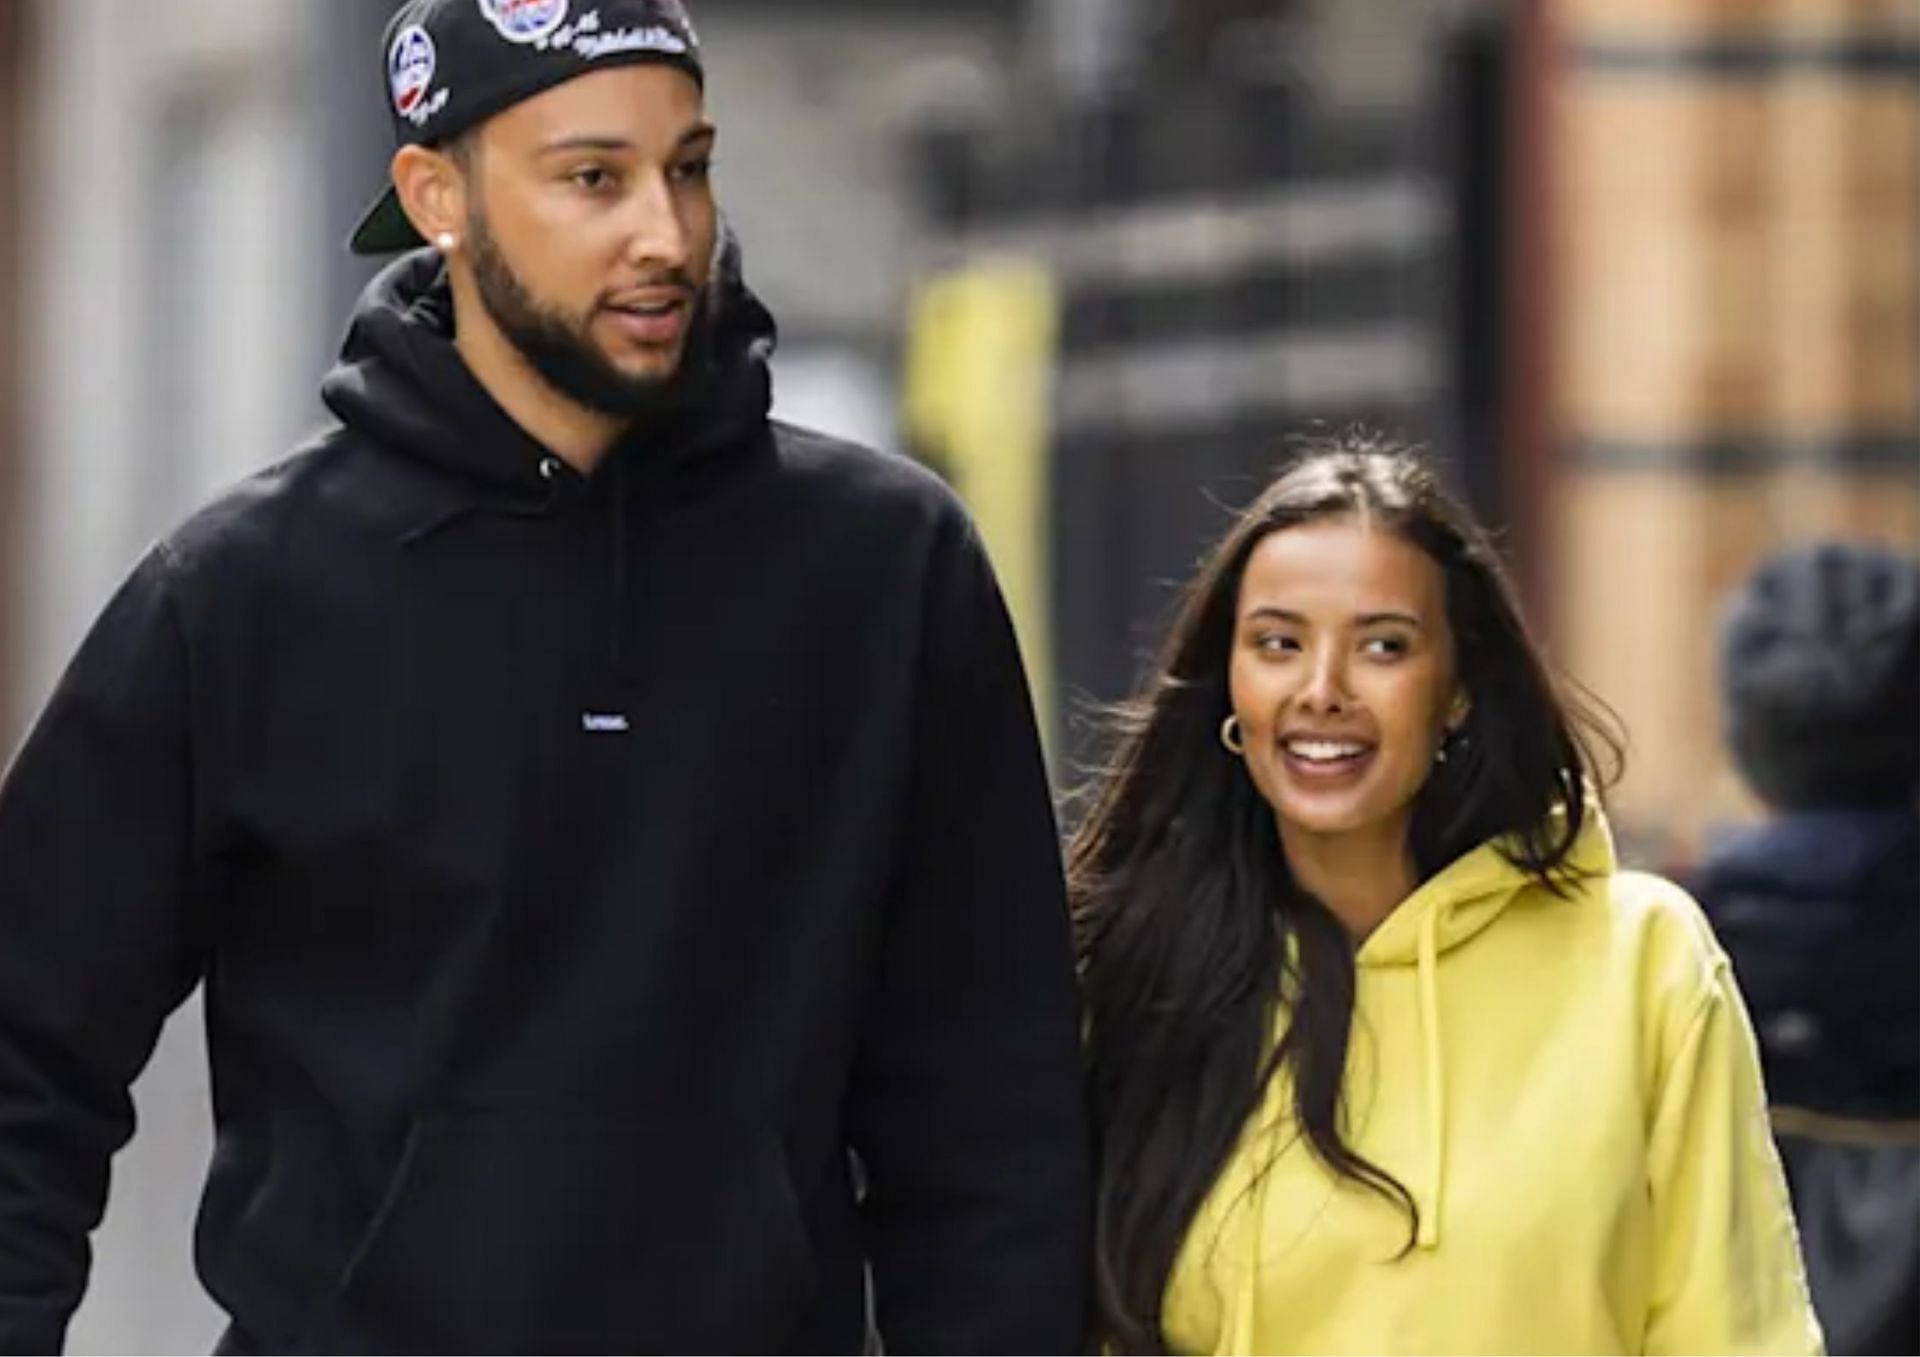 Double it and give it to the next person? 😂#bensimmons #mayajama